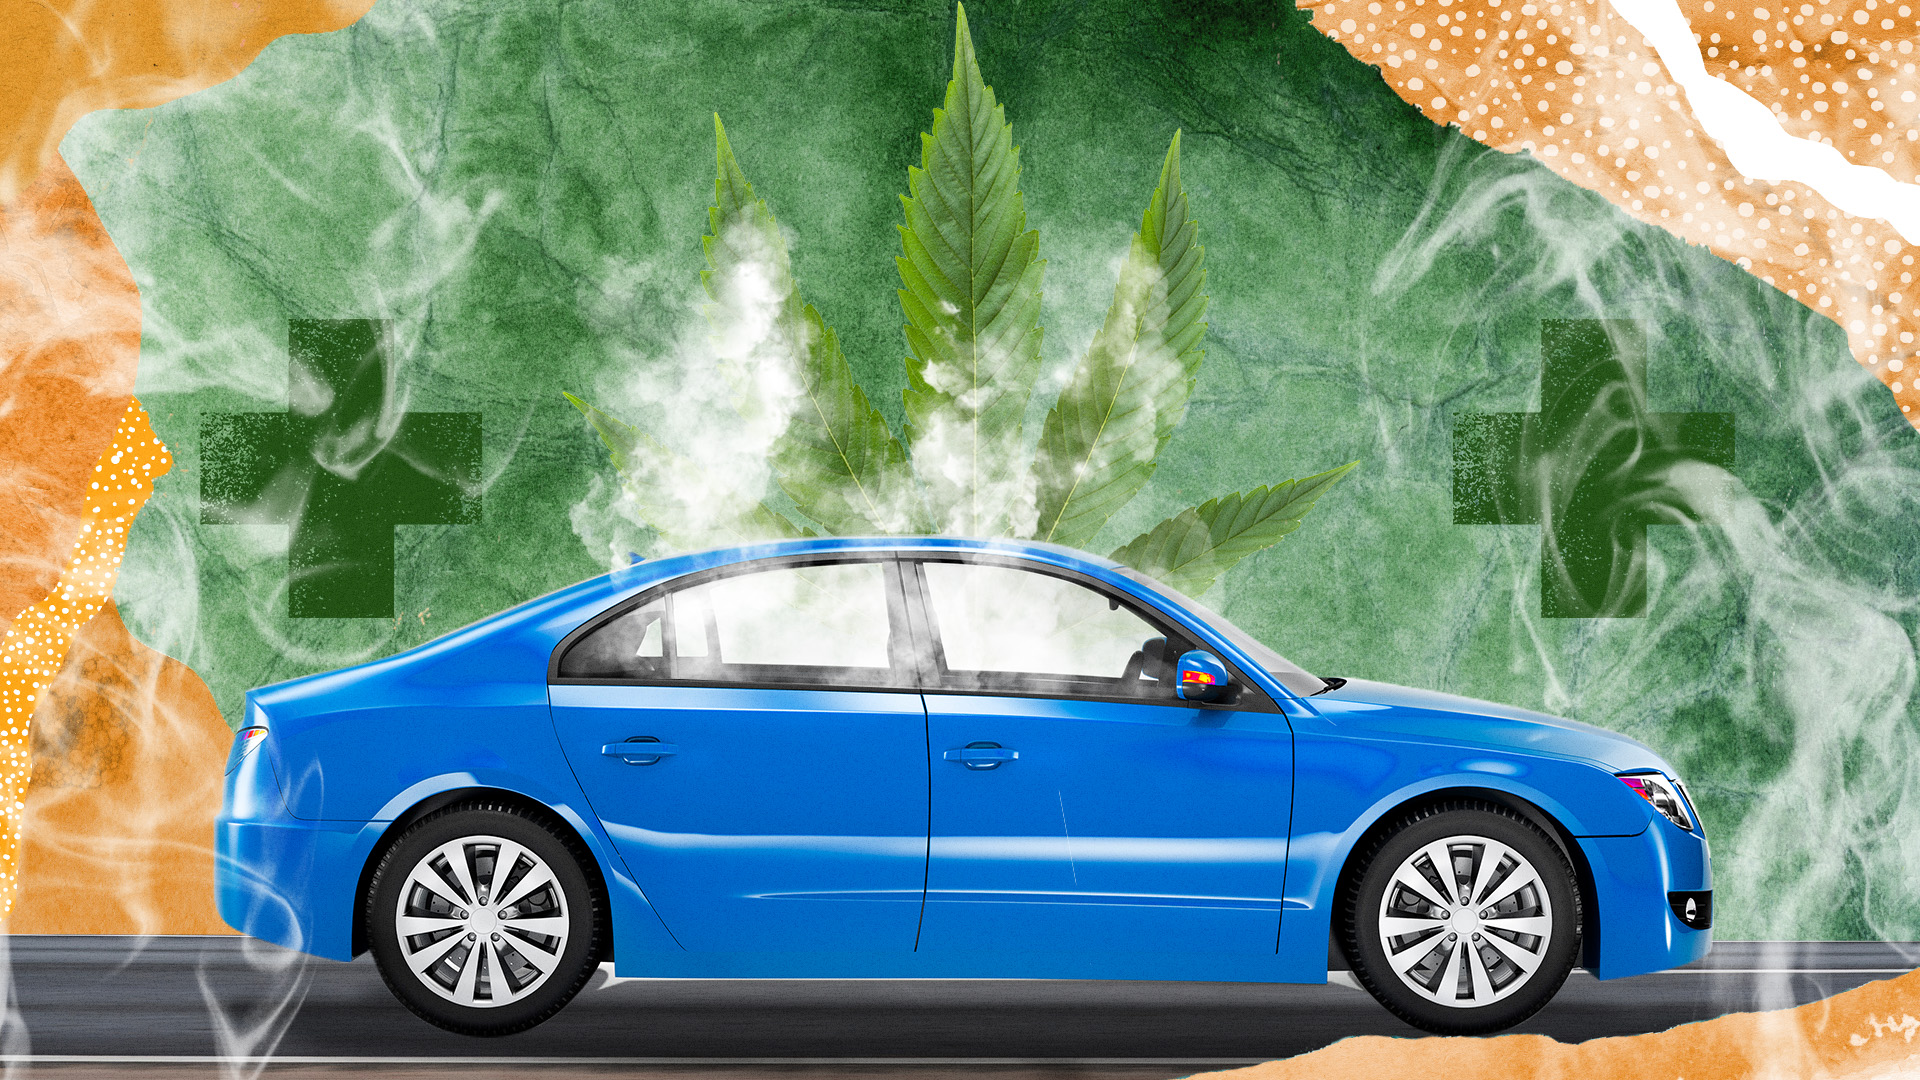 Can I Smoke Medical Cannabis Products While Driving?